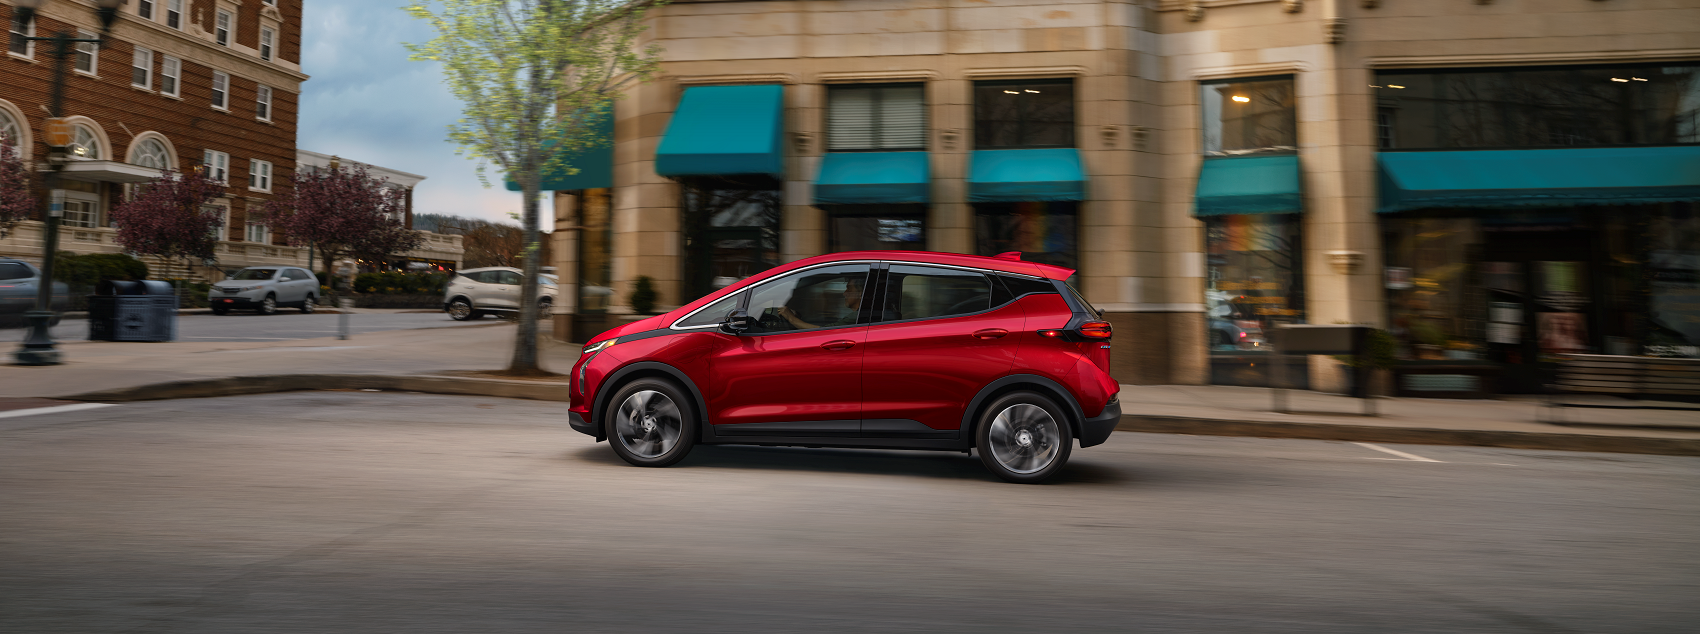 Chevy Bolt Parks in City